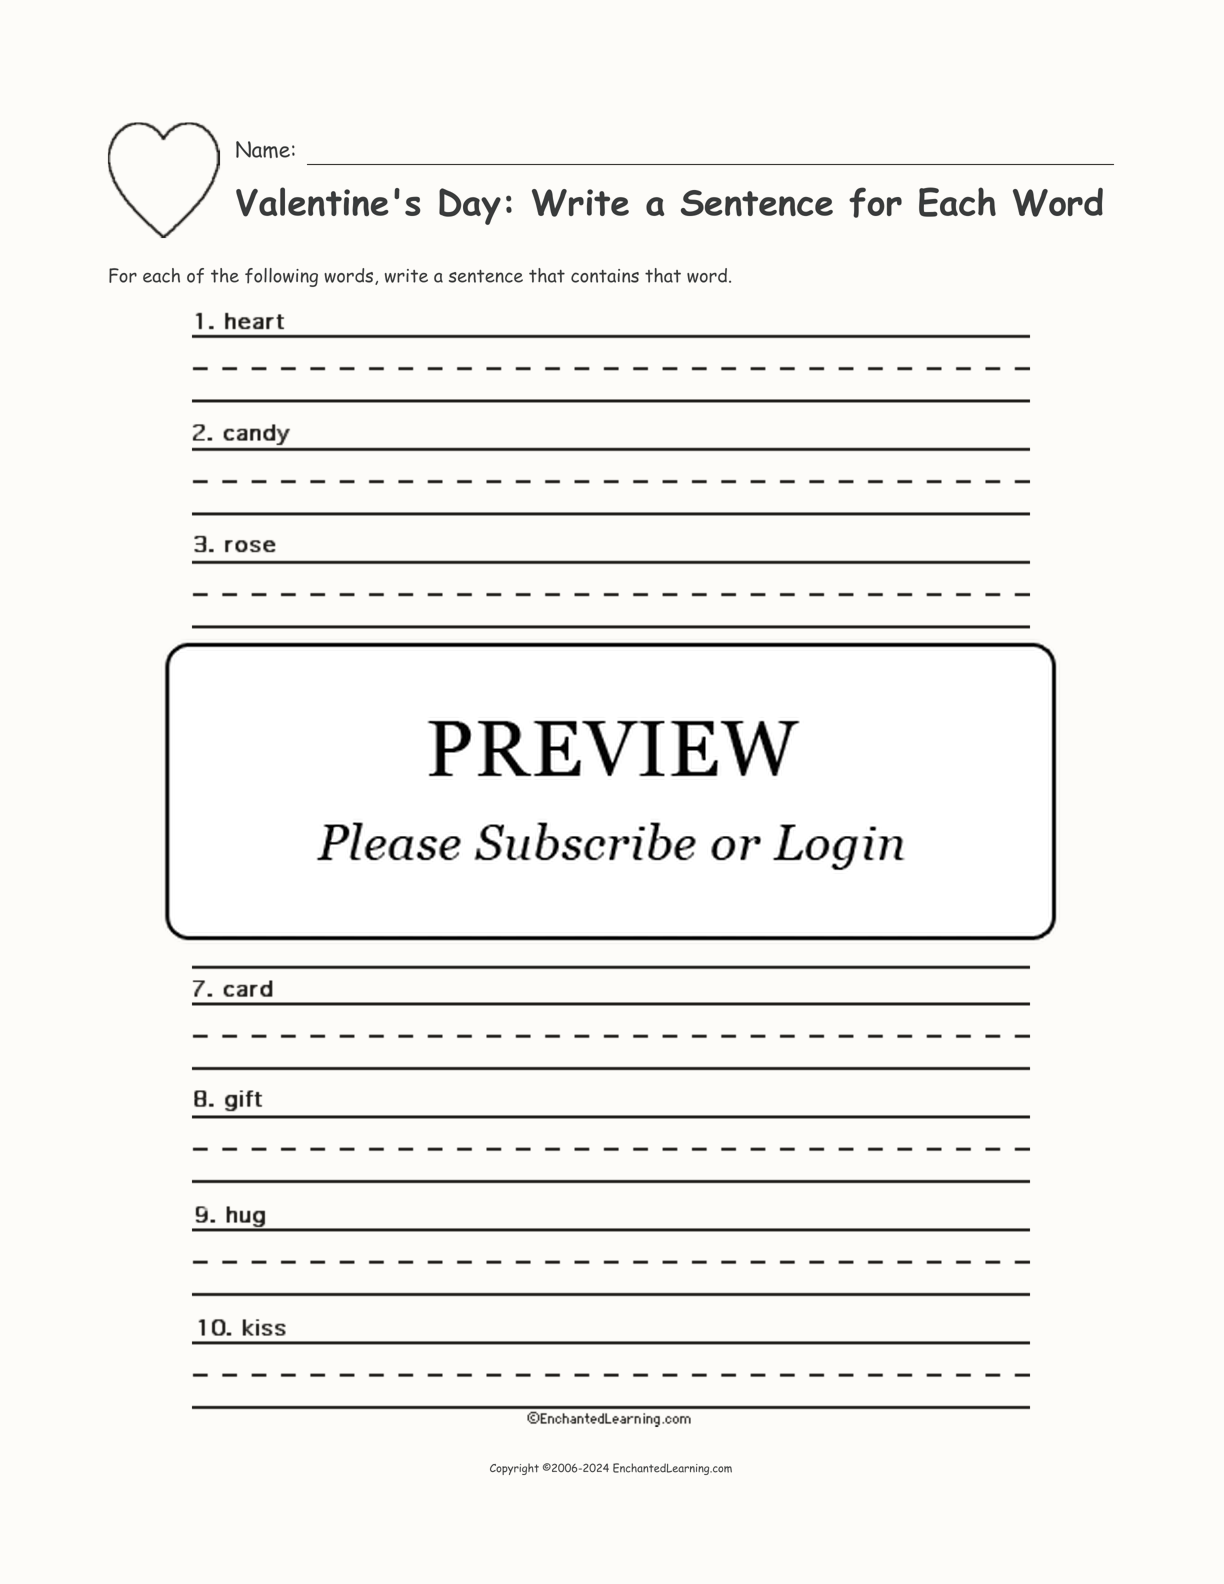 Valentine's Day: Write a Sentence for Each Word interactive printout page 1